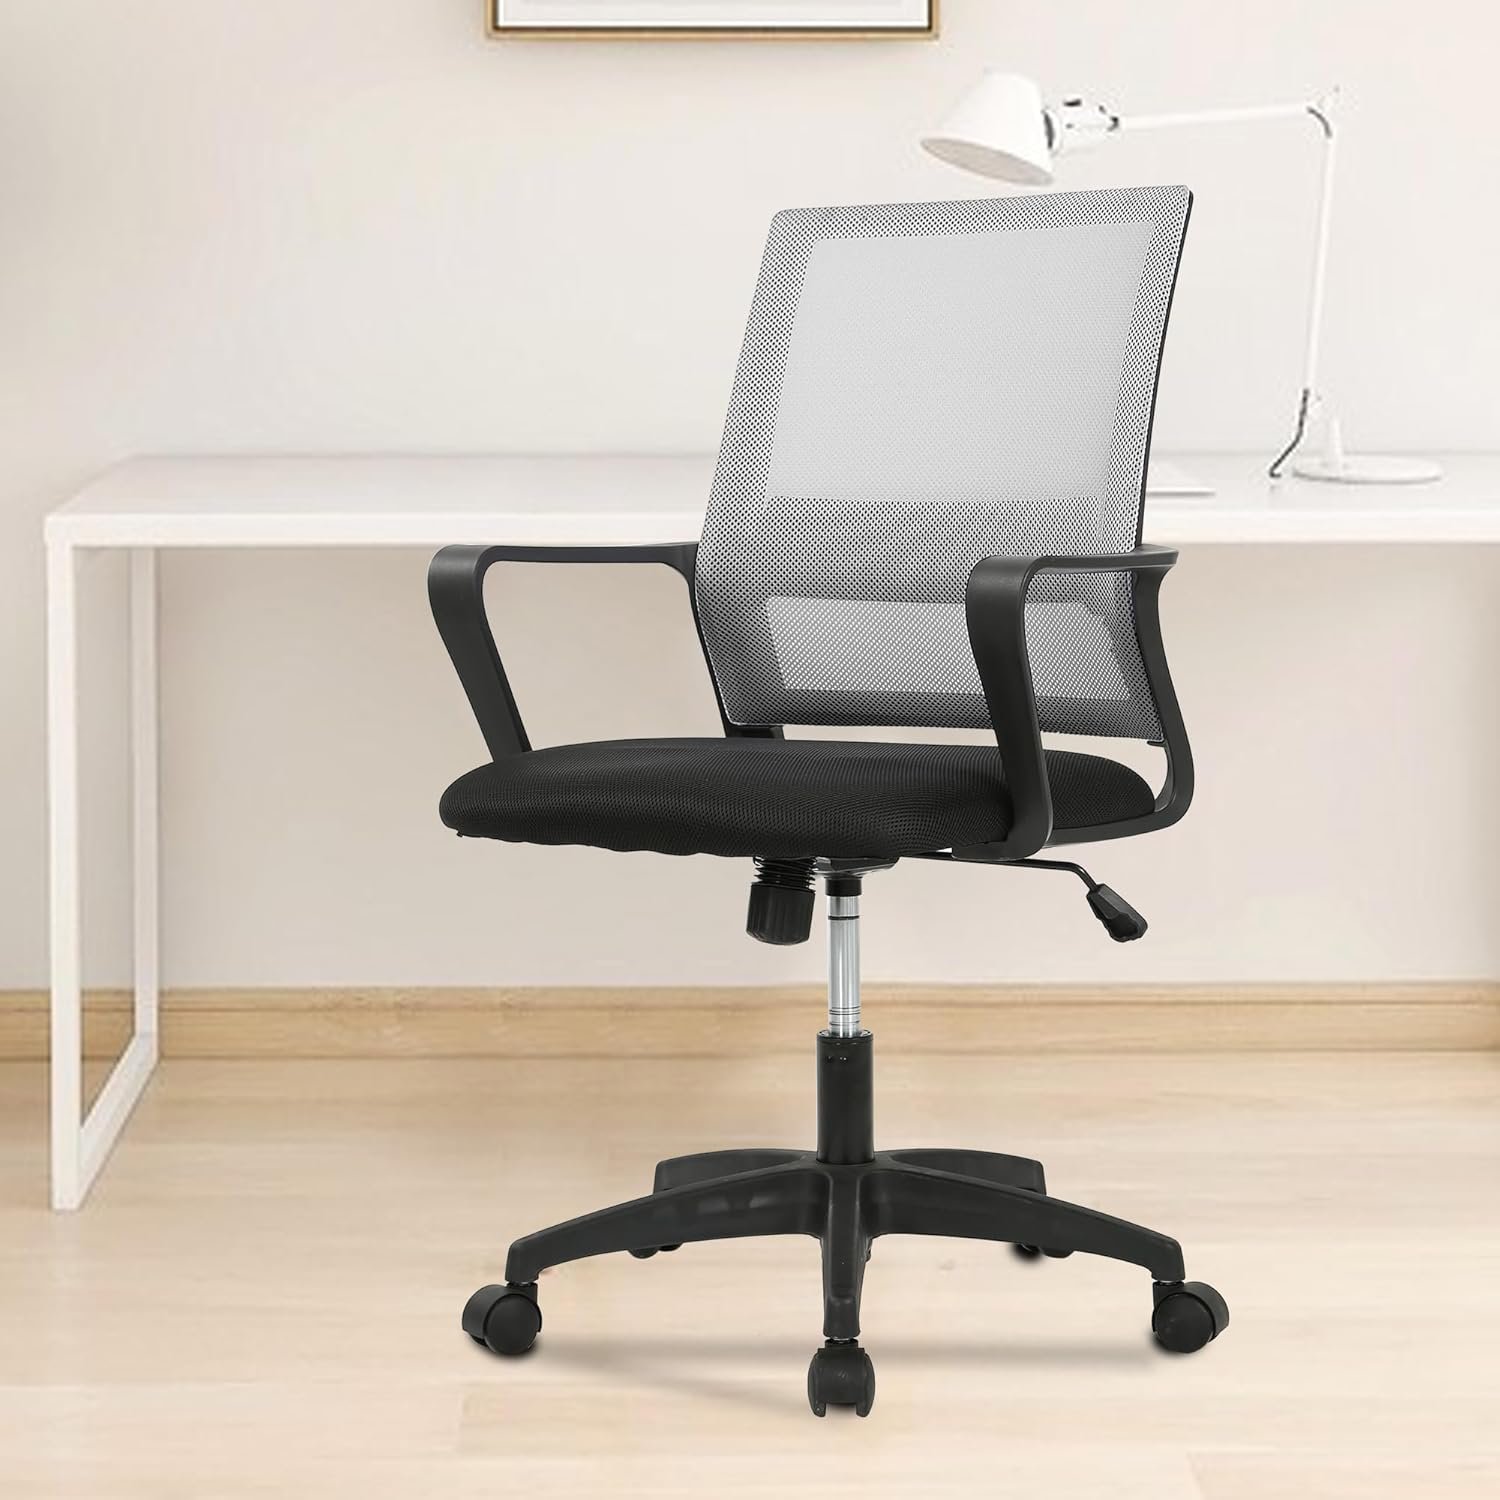 PayLessHere Office Chair Computer Chair Ergonomic Mesh Chair Mid-Back Home Office Swivel Chair Modern Desk Chair with Wheels Armrests Lumbar Support (White)